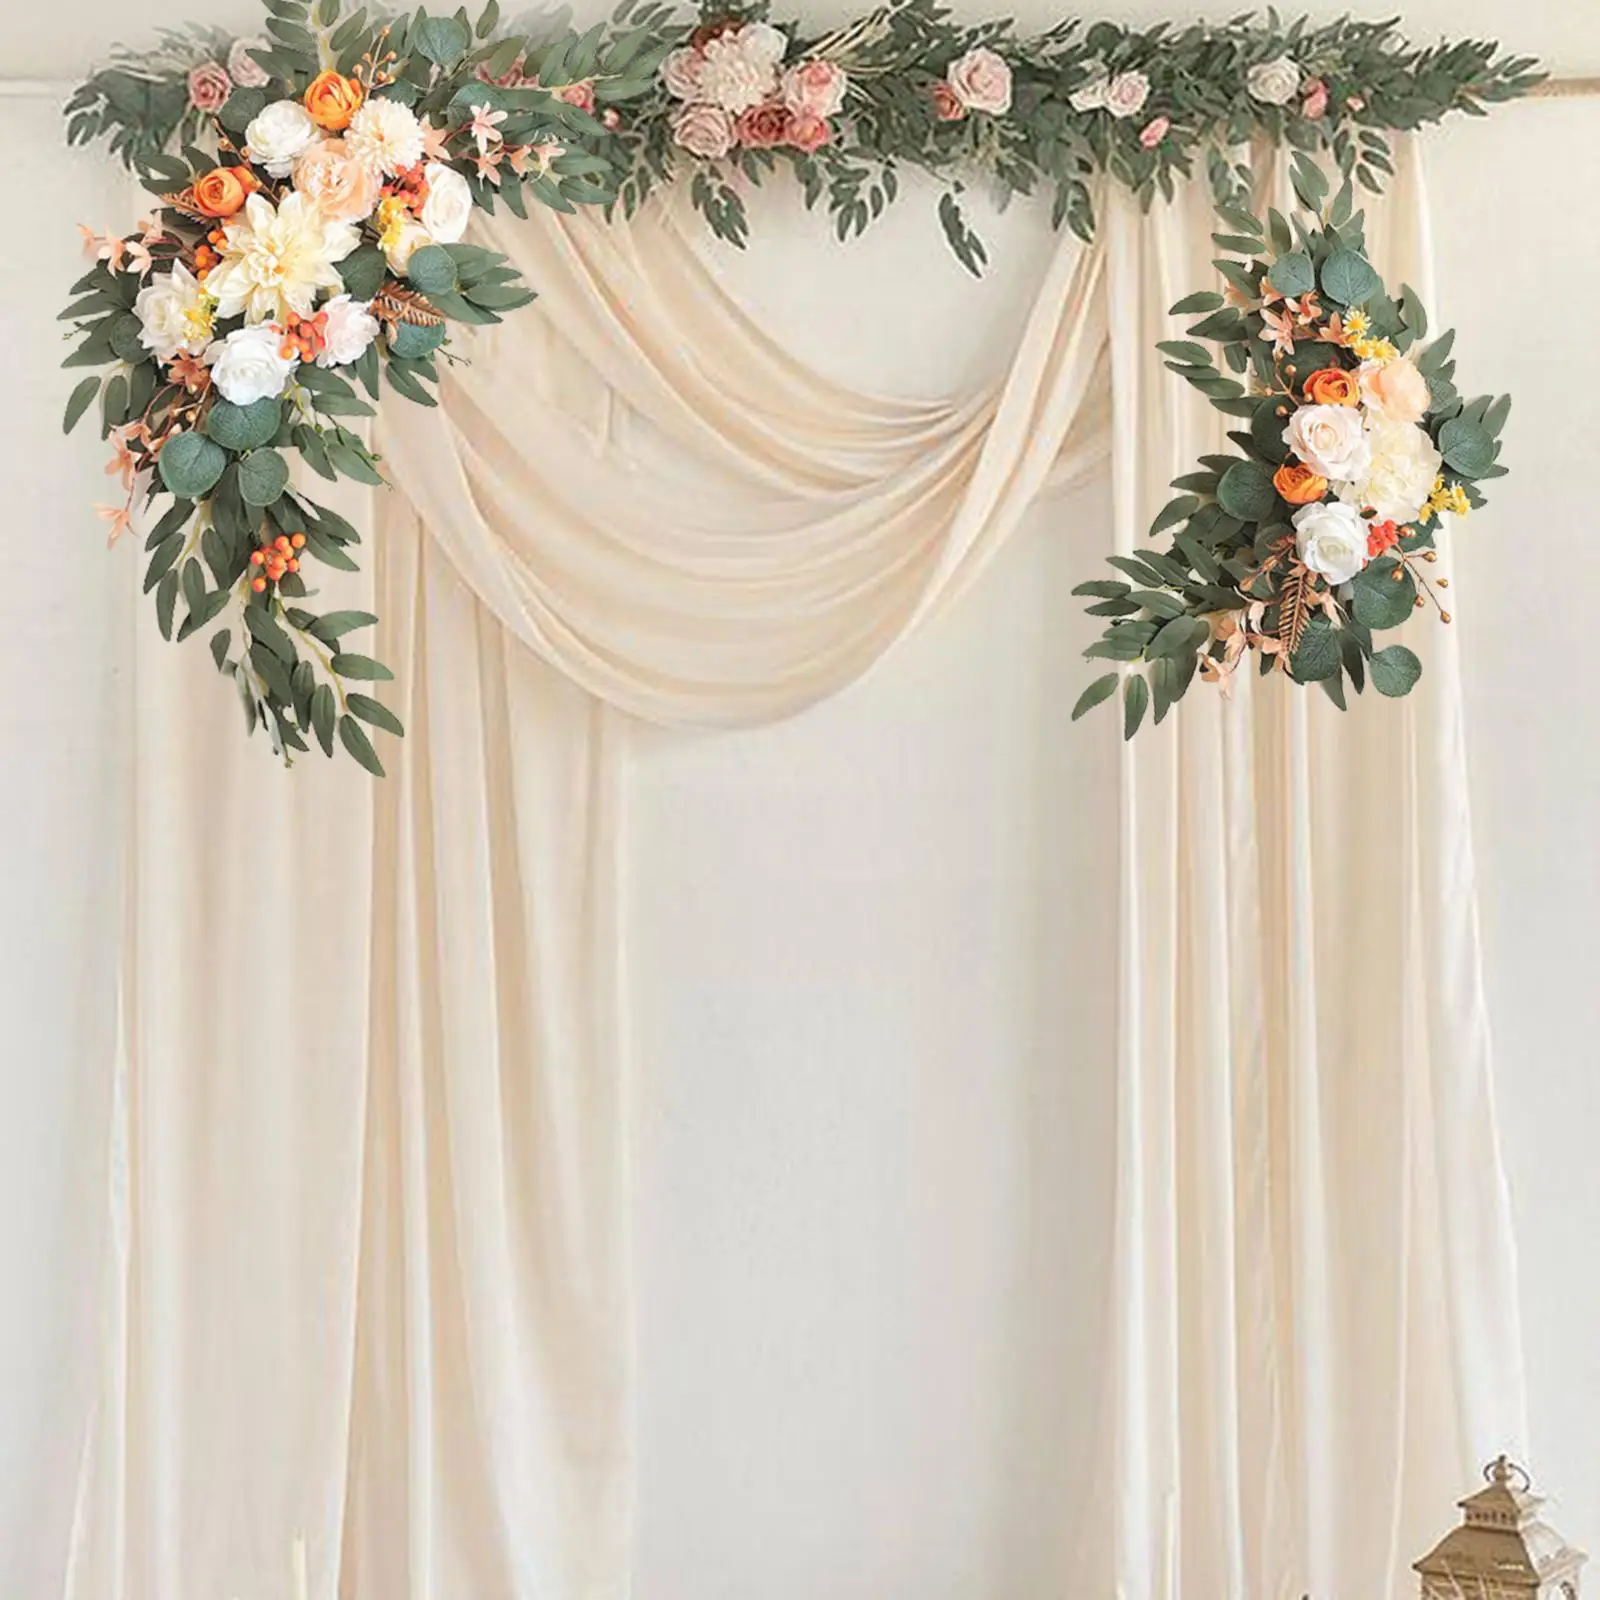 Artificial Wedding Arch Flowers Rose Flower Swag Handcrafted for Ceremony and Reception Backdrop Decoration Elegant Welcome Sign